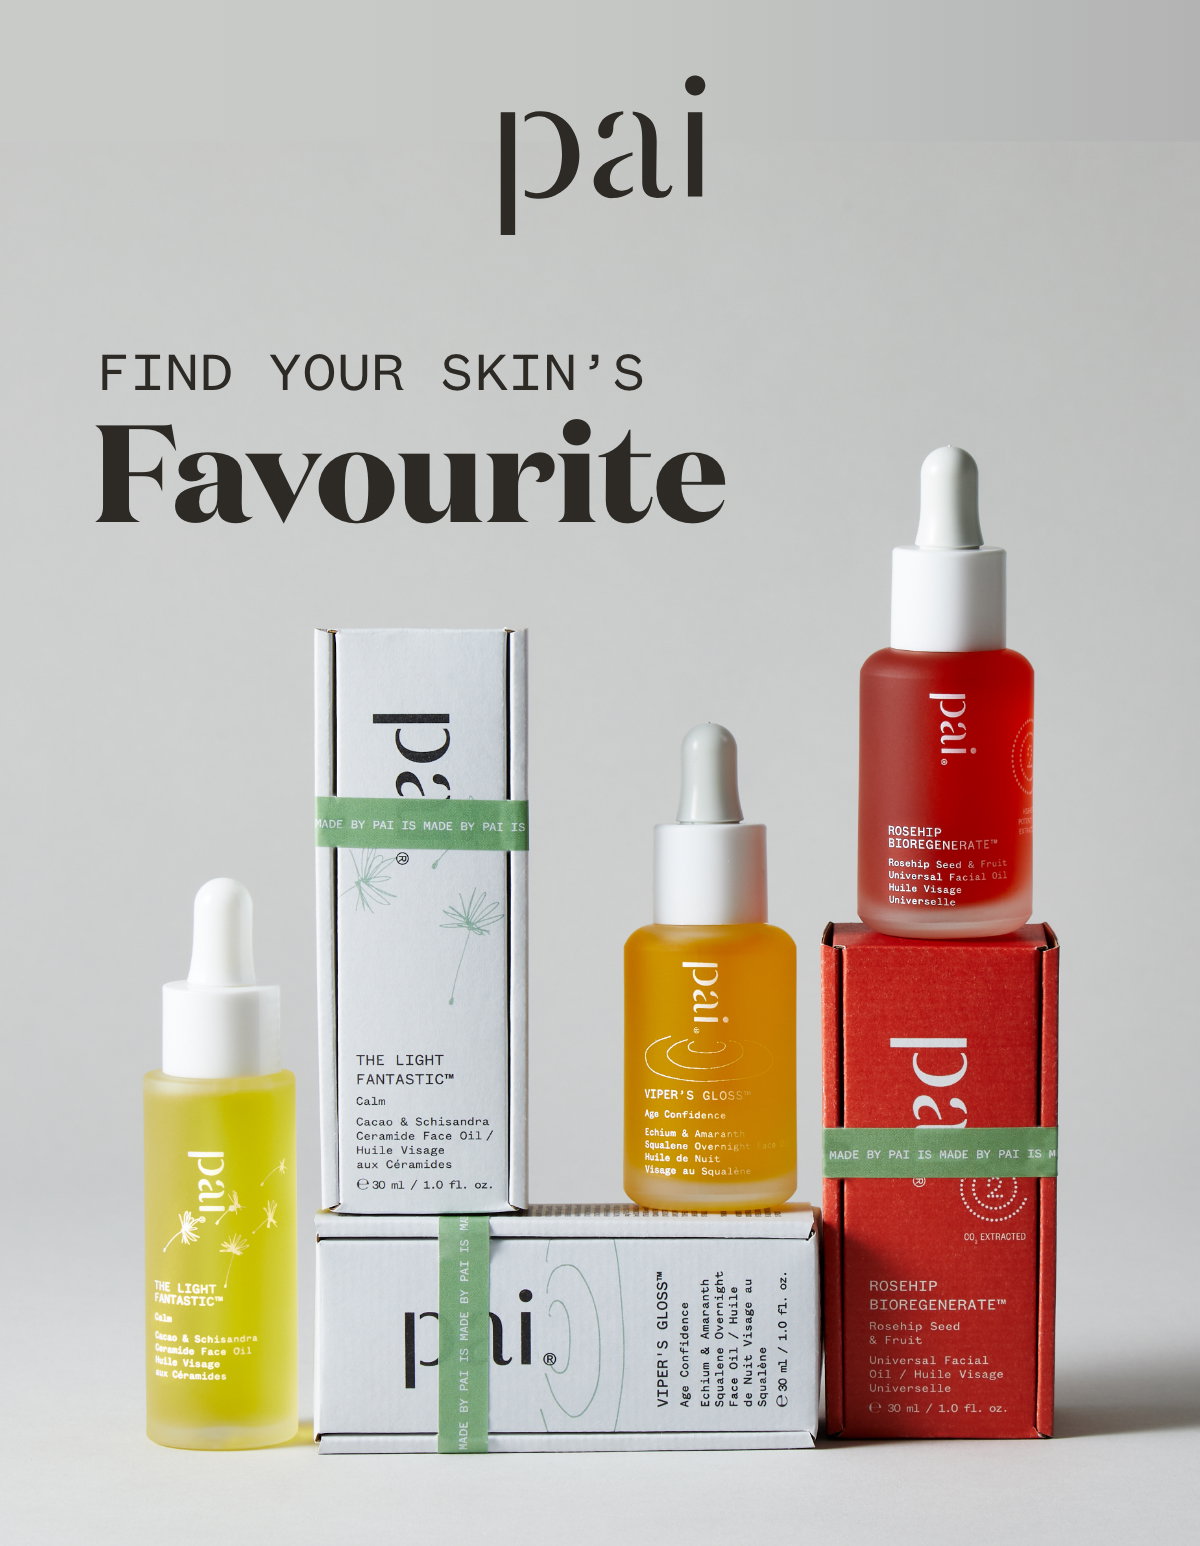 Pai Skincare London  Made for Sensitive Skin, Goodness Built In